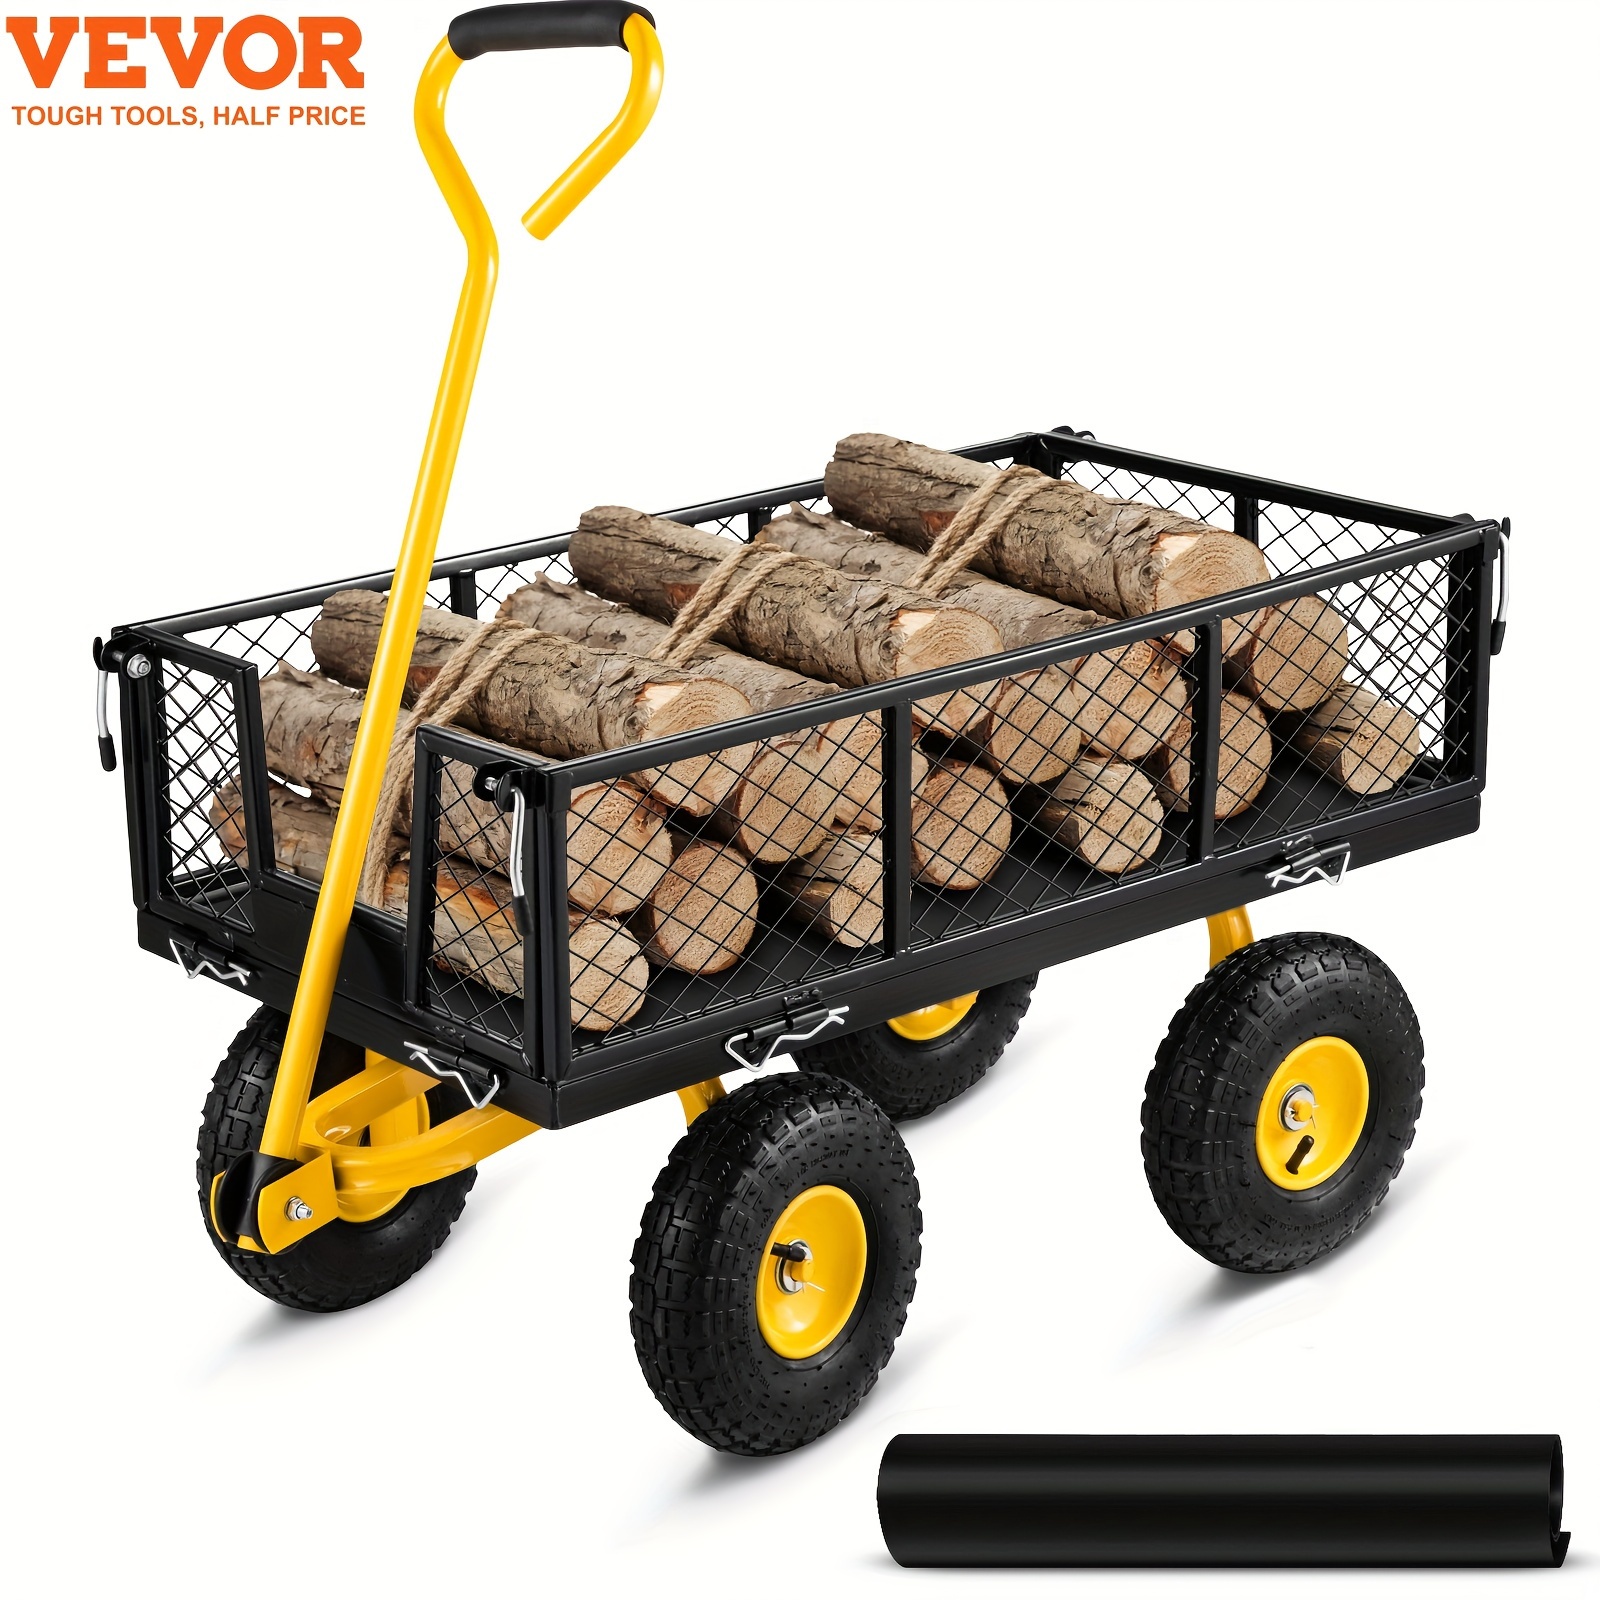 

Vevor Steel Garden Cart, Heavy Duty 500 Lbs Capacity, With Removable Mesh Sides To Convert Into Flatbed, Utility Metal Wagon With 180° Rotating Handle And 10 In Tires, Perfect For Garden